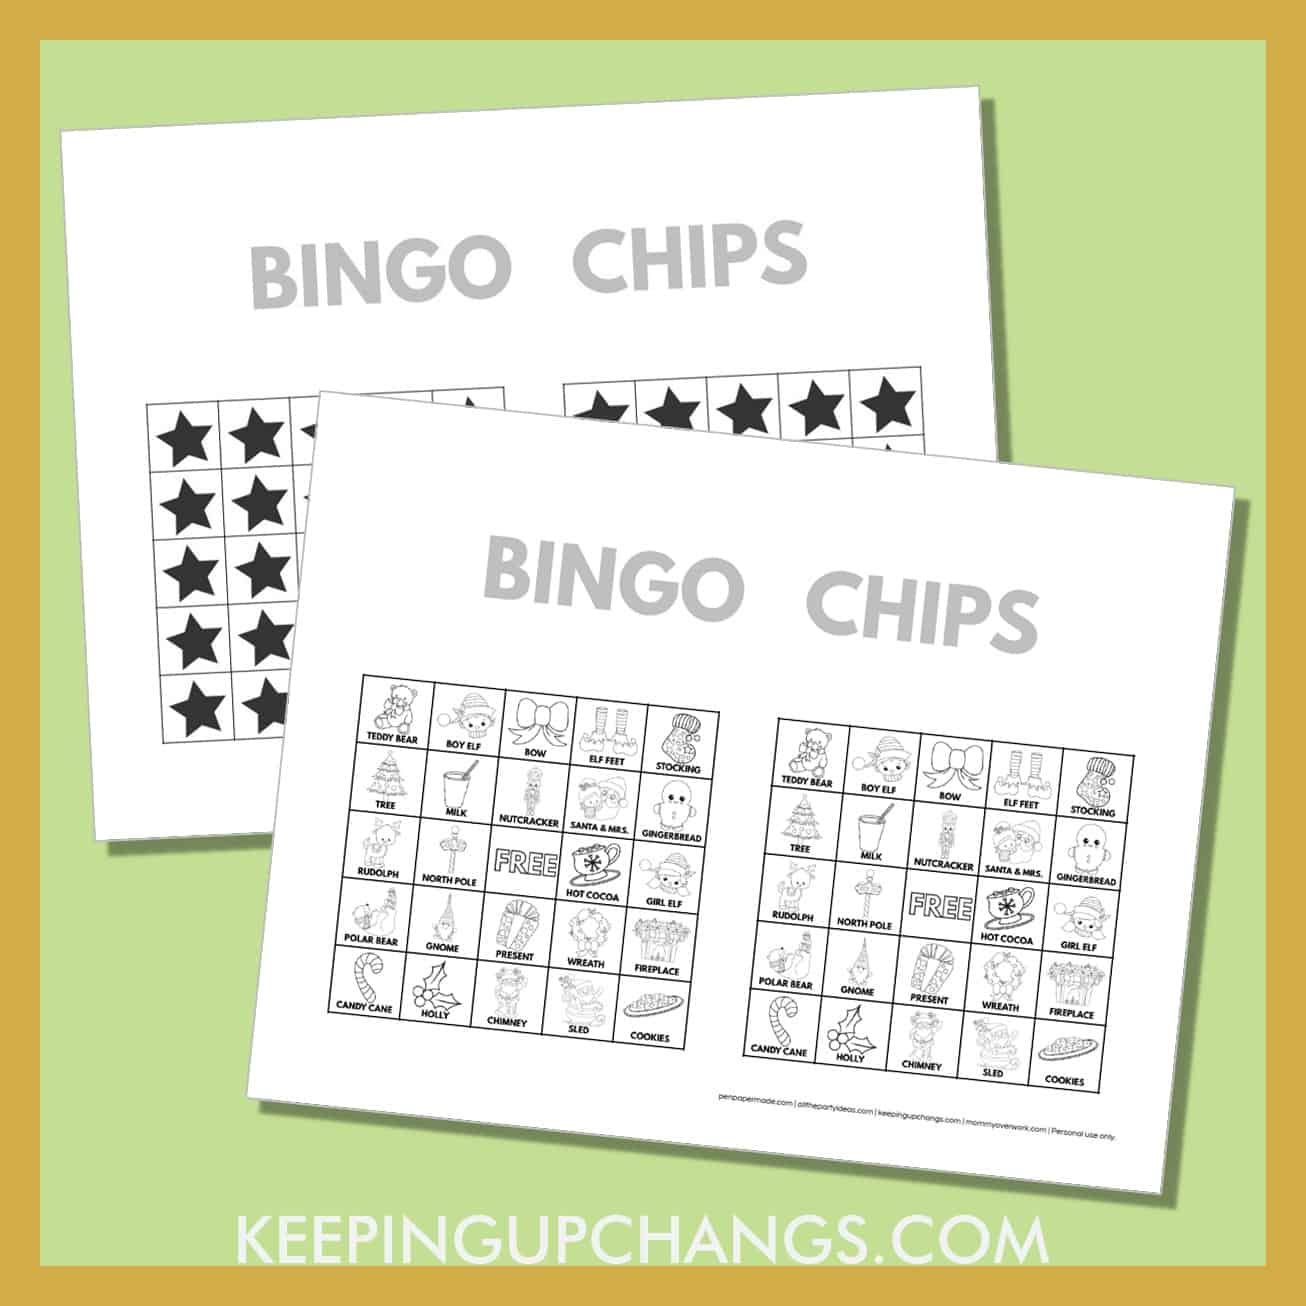 free christmas bingo card 5x5 black white coloring game chips, tokens, markers.